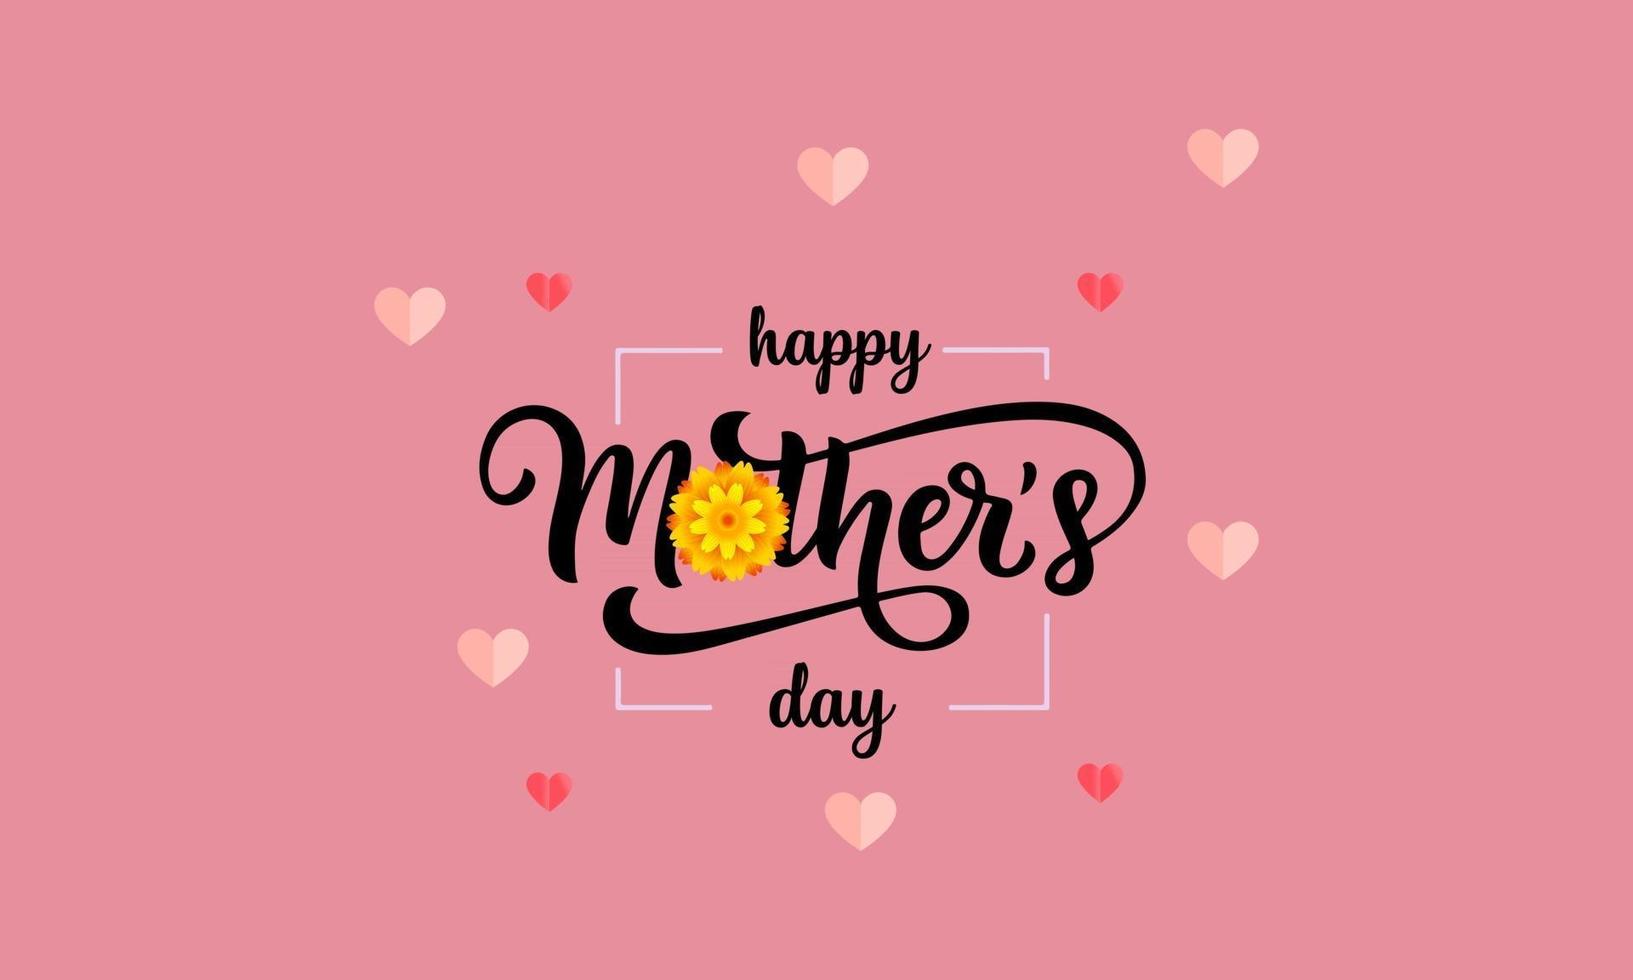 Happy Mothers Day banner Holiday background heart made of pink and red Origami Hearts on soft pink background vector